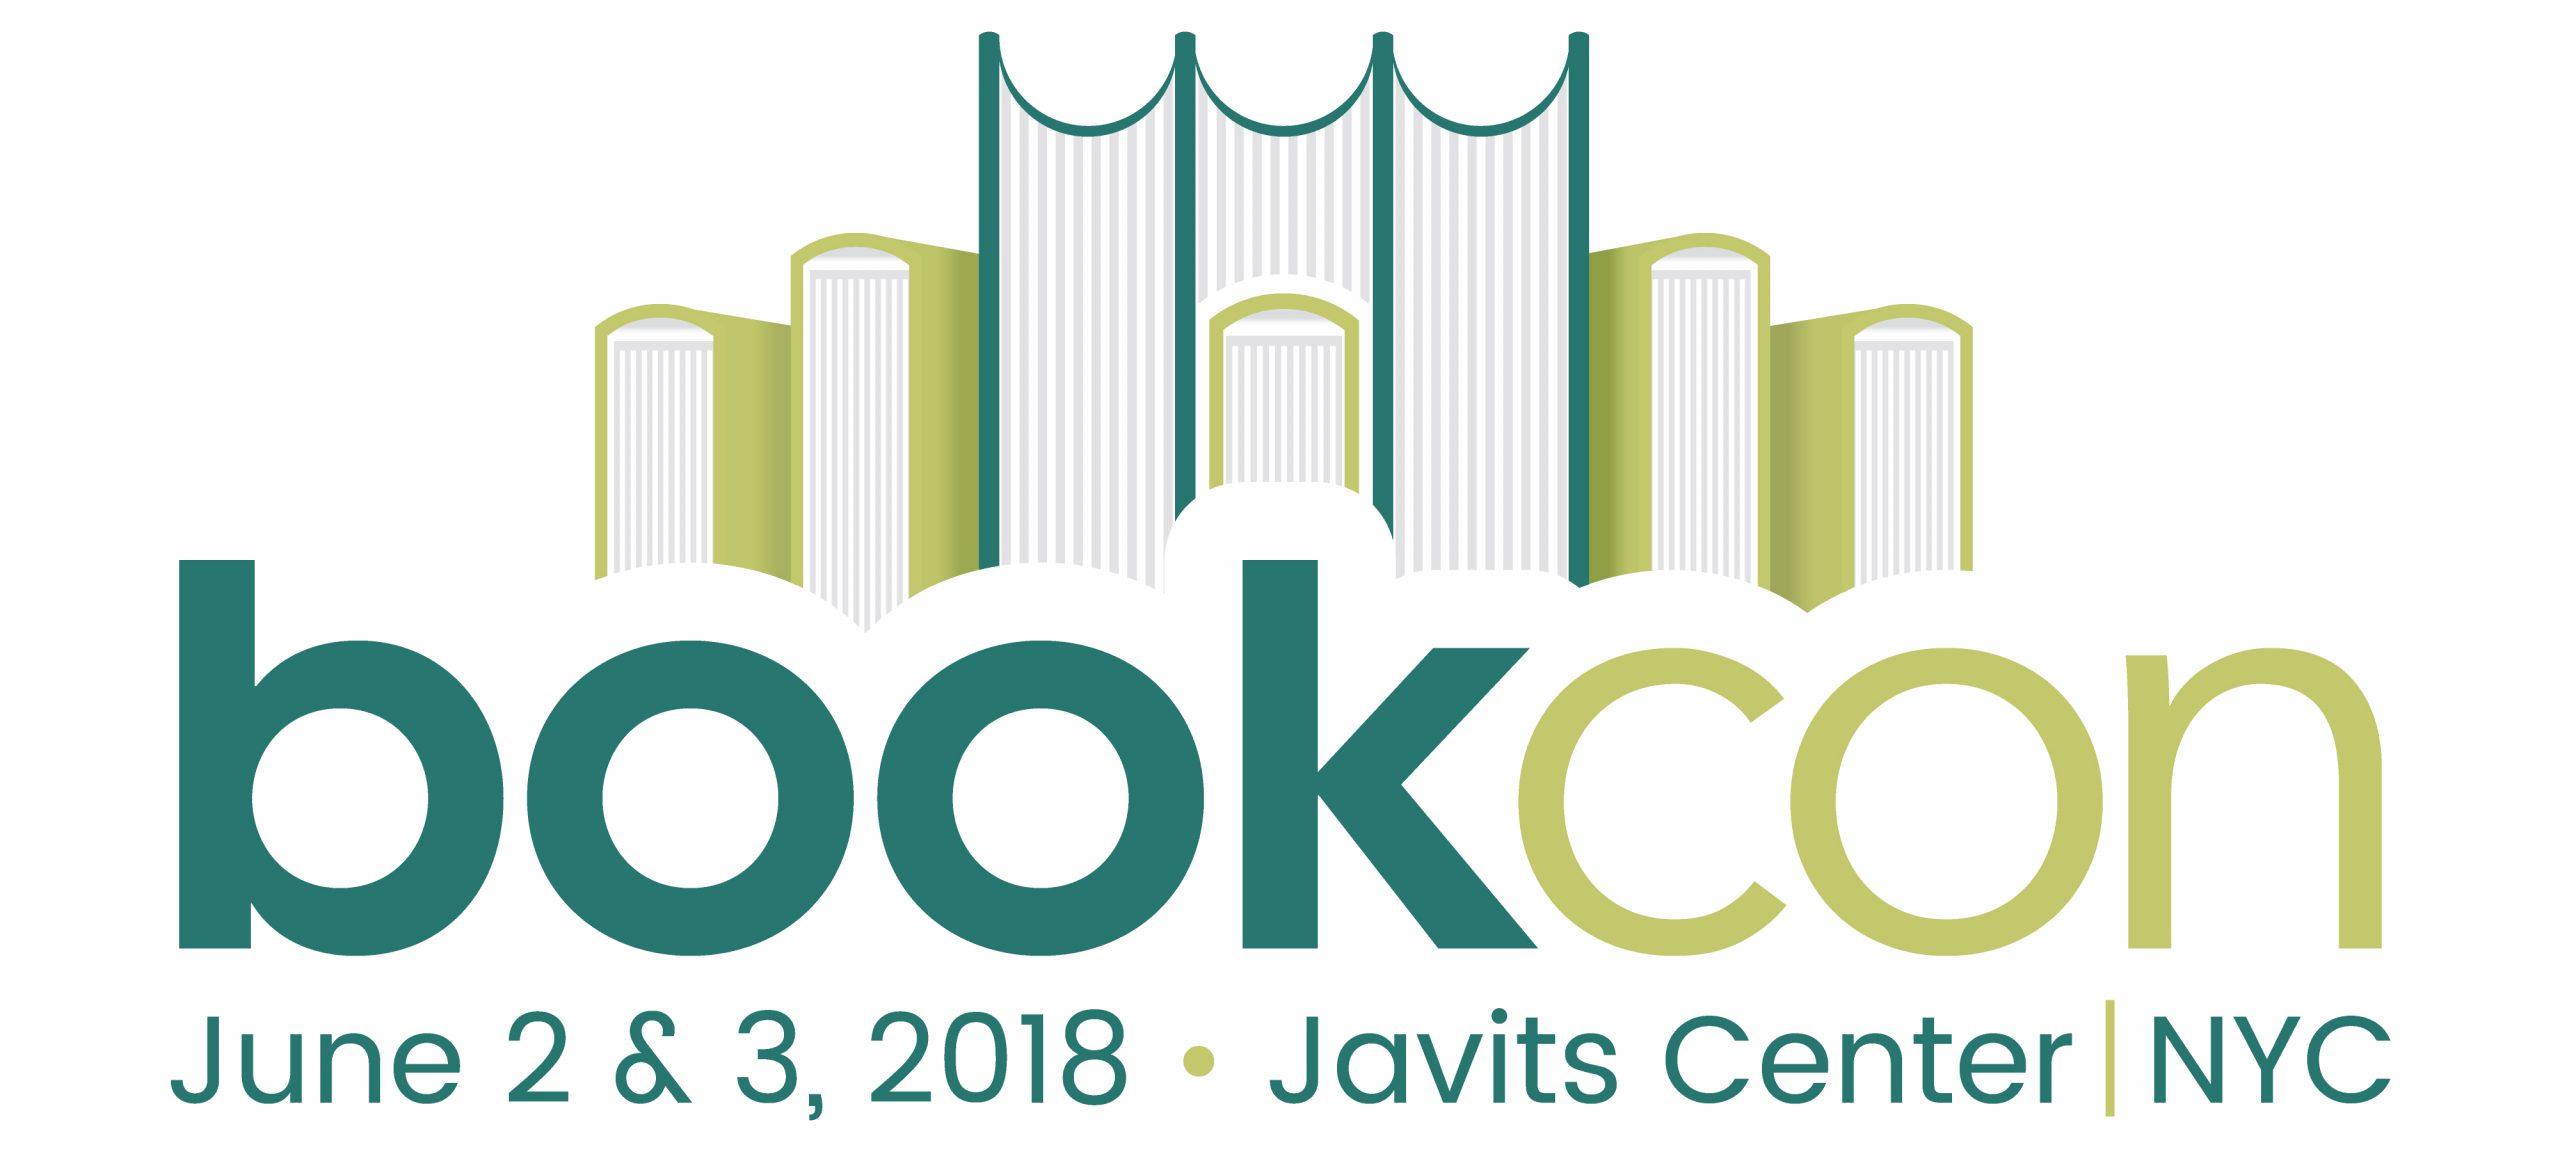 Drop by and say hello at BookCon! Quirk Books